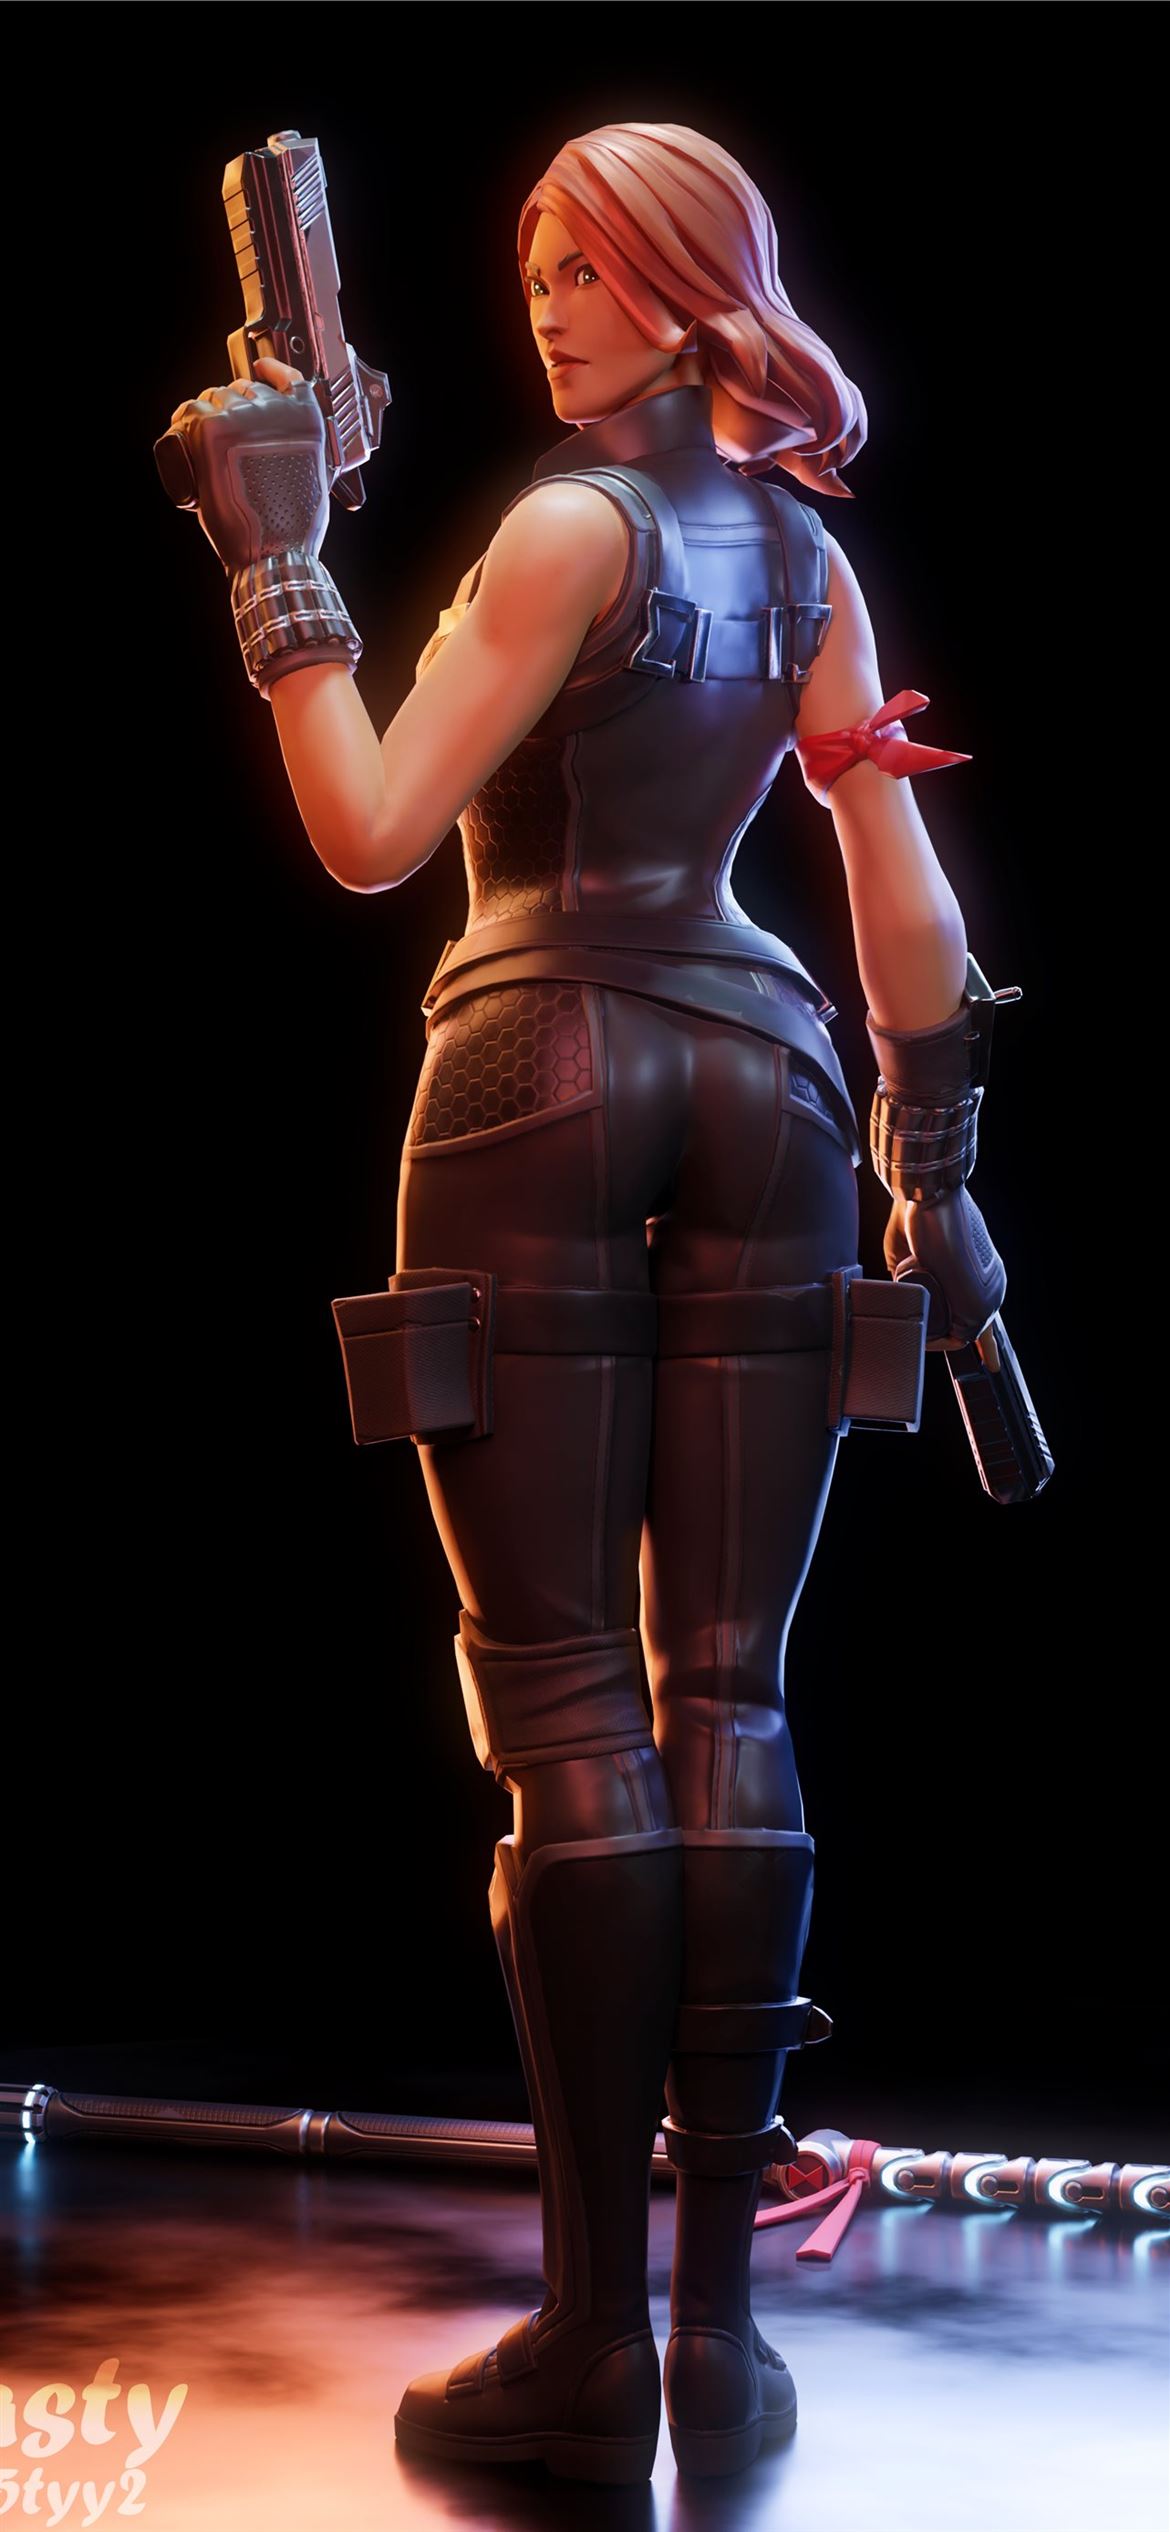 Thicc Fortnite Skins Wallpapers